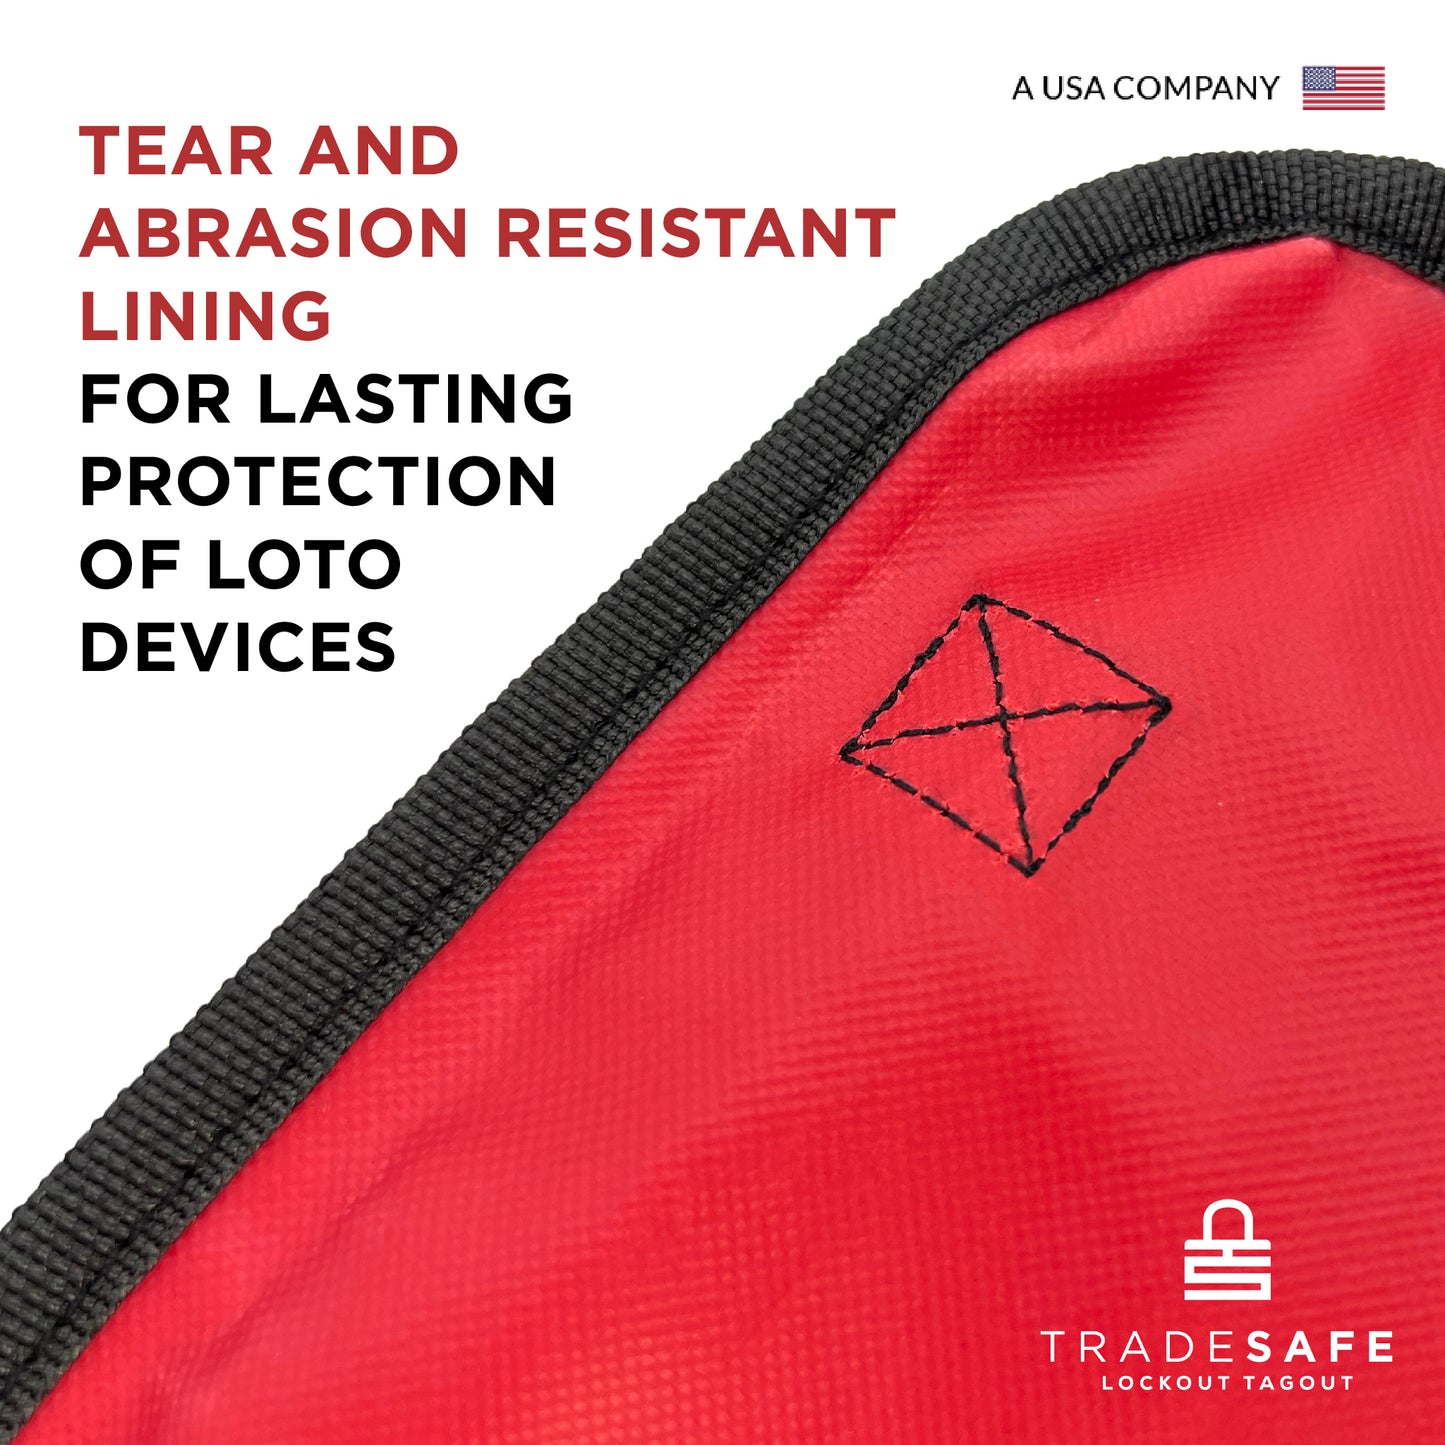 infographics of lockout tagout kit bag showing its details